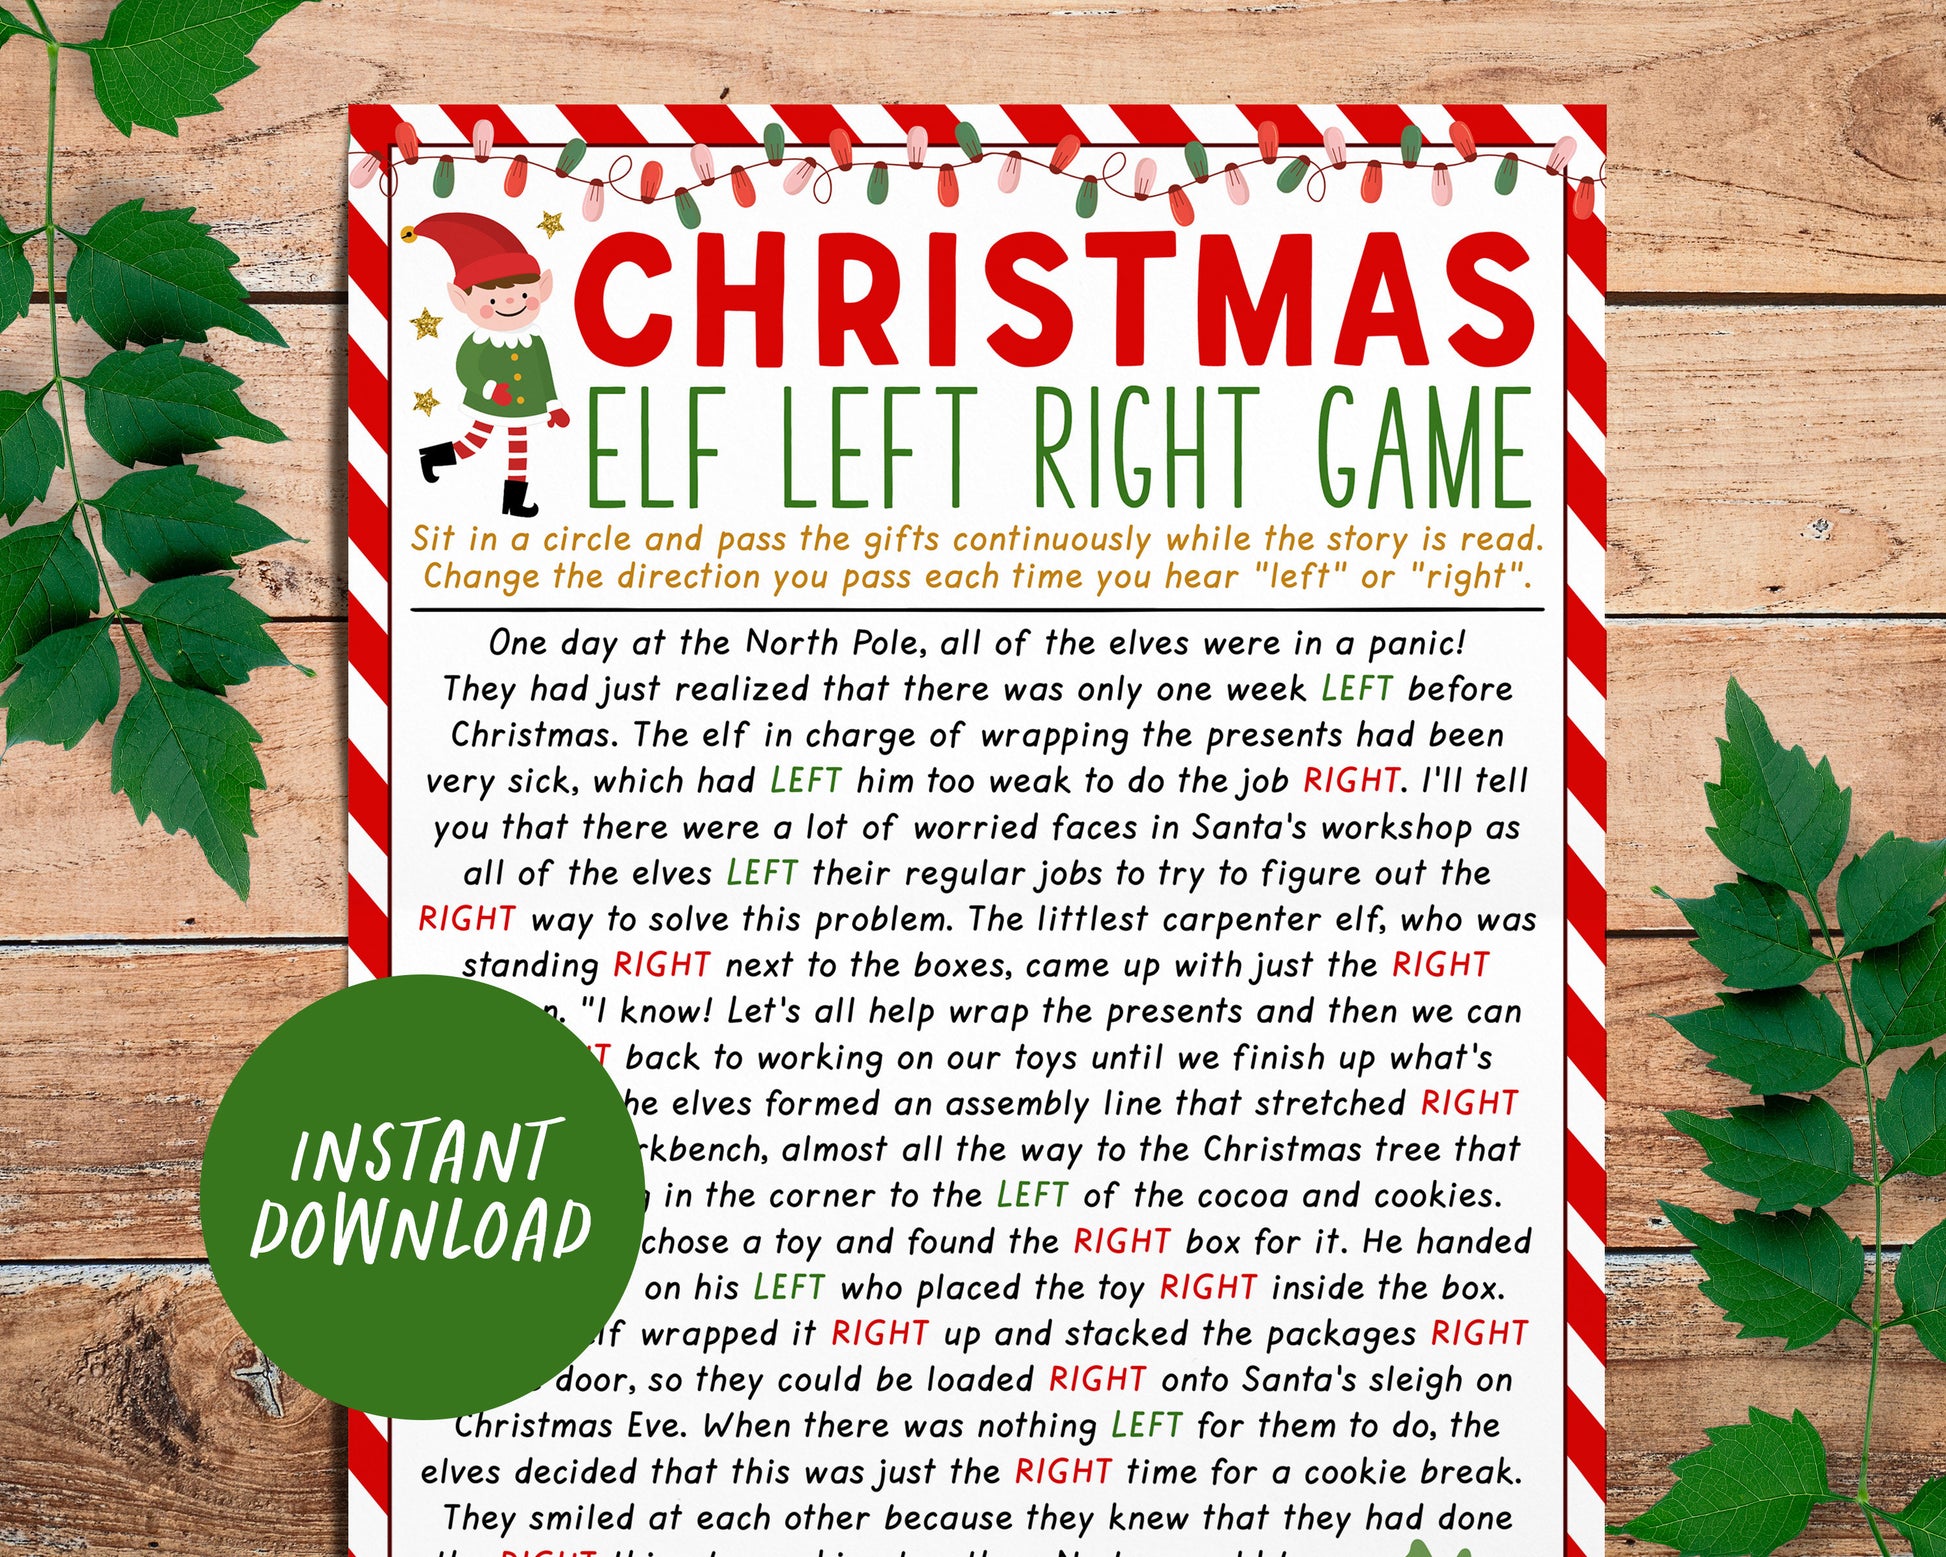 Christmas Roll the Dice Gift Exchange Game the Hilarious 